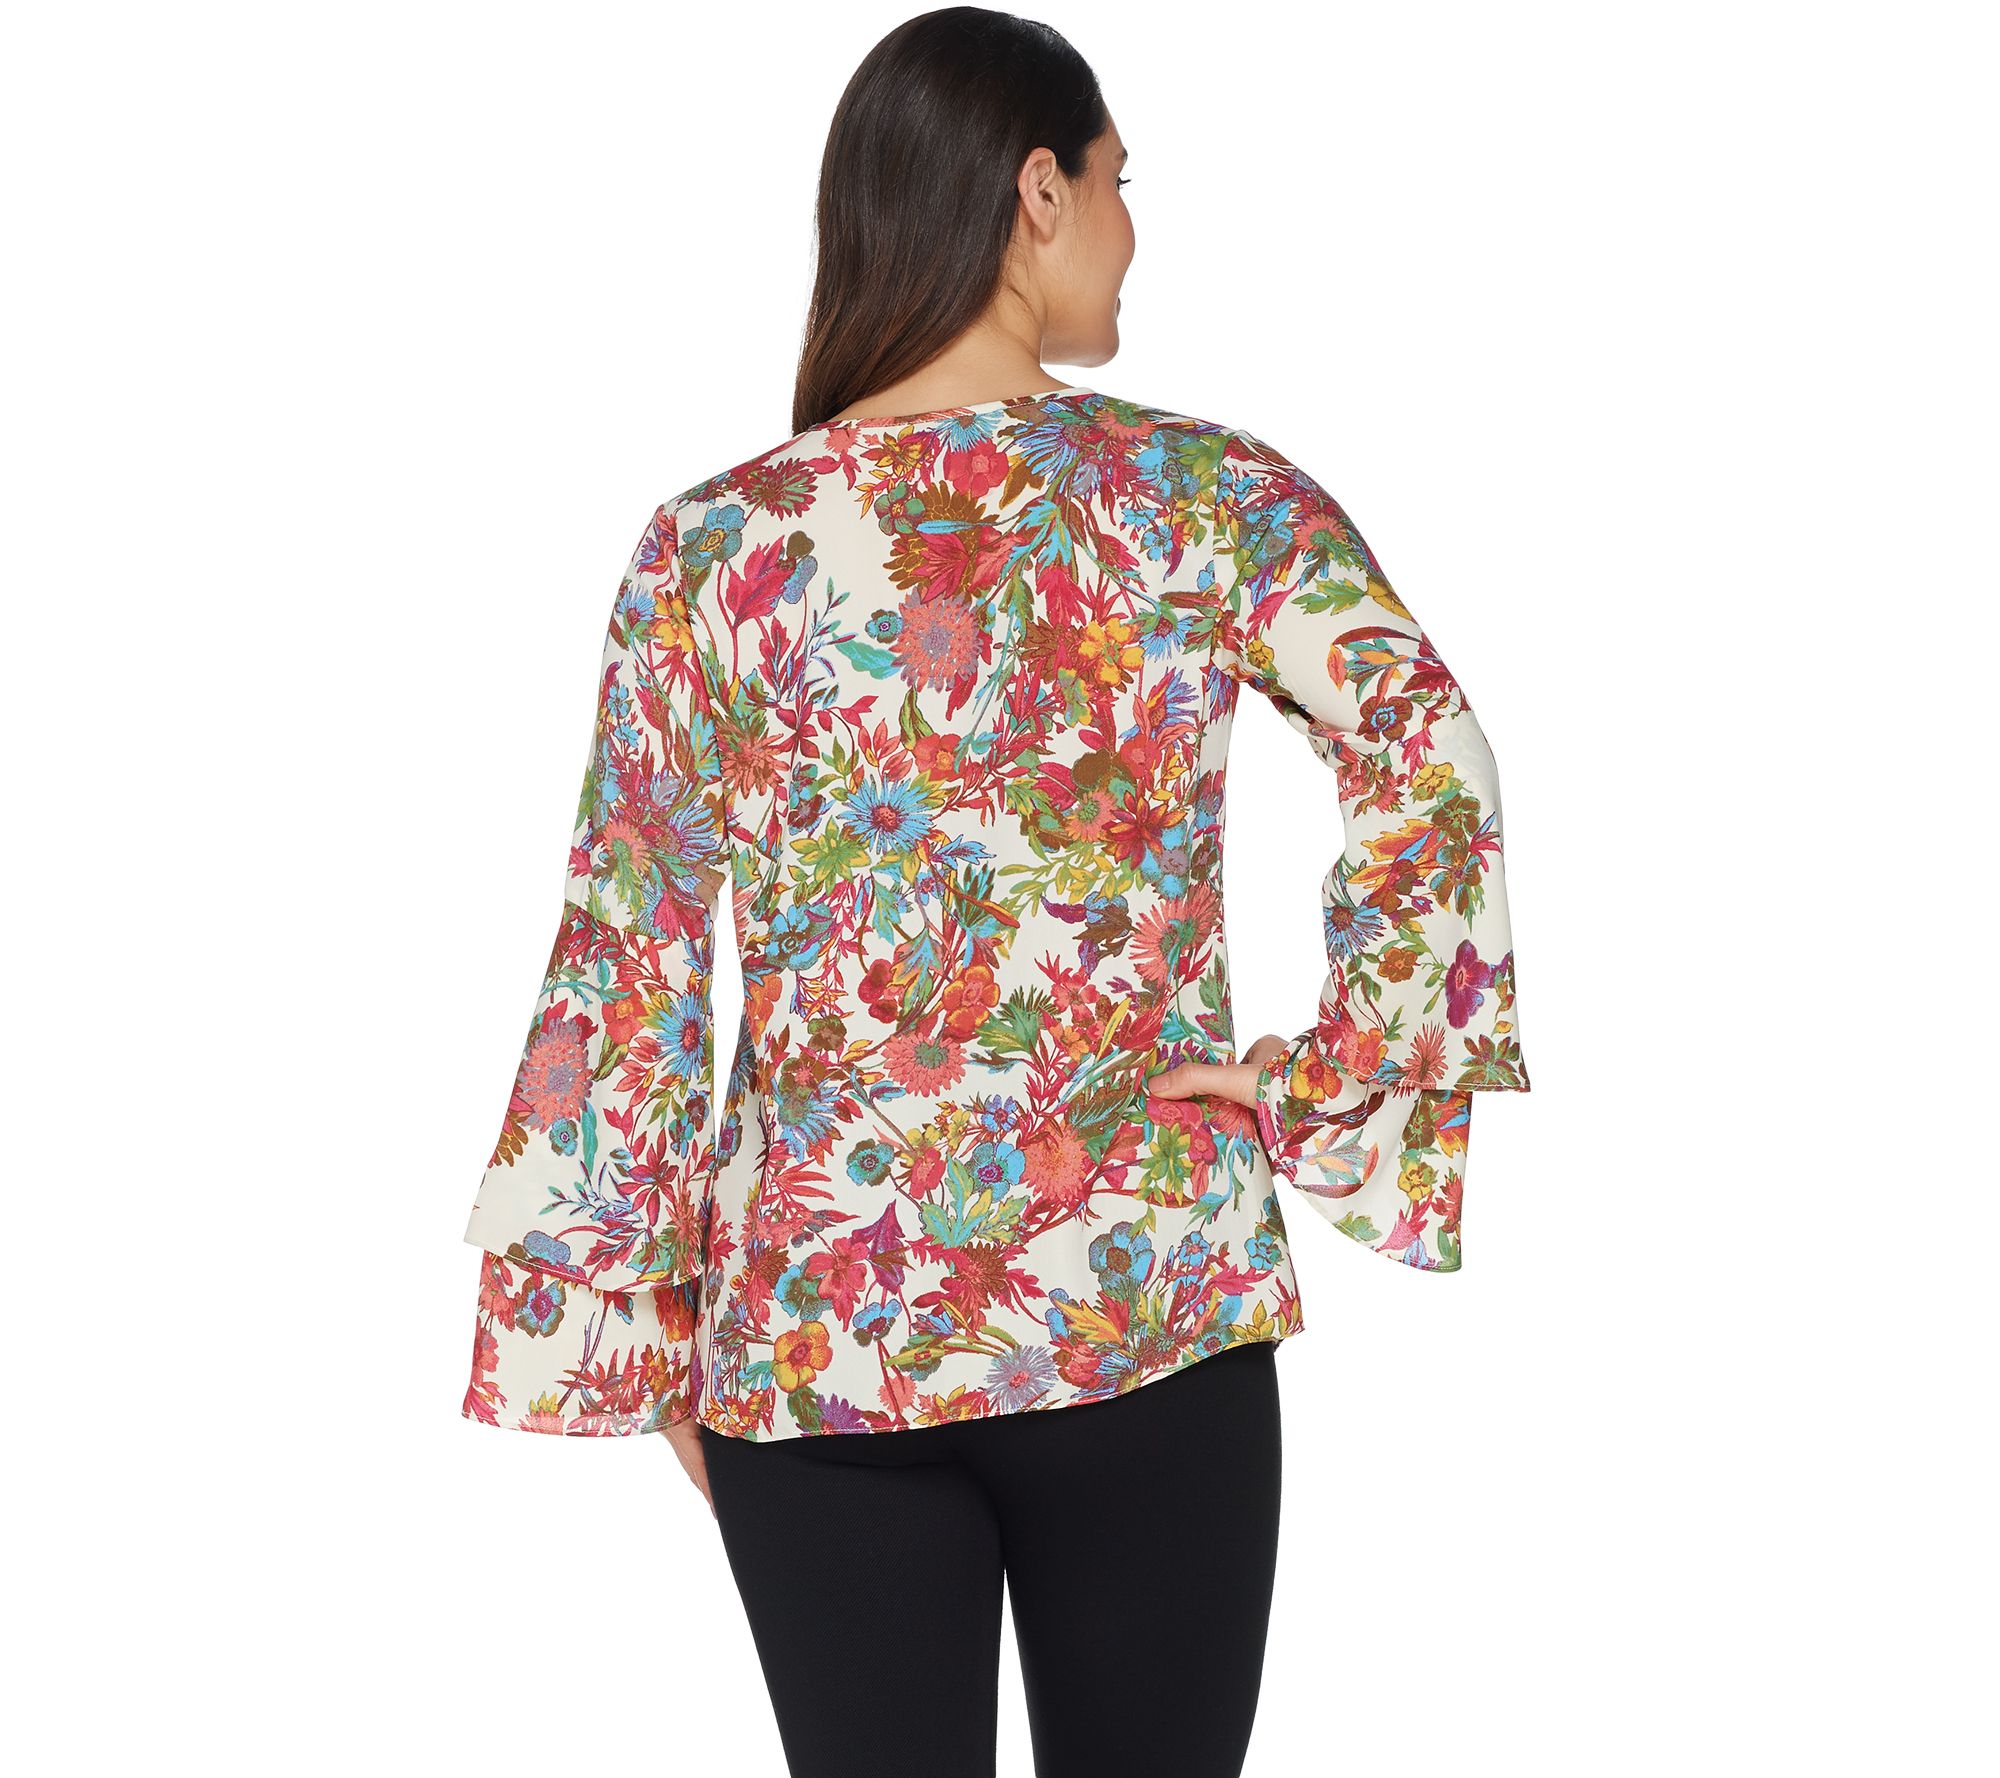 Linea by Louis Dell'Olio Exotic Floral Print Top - QVC.com